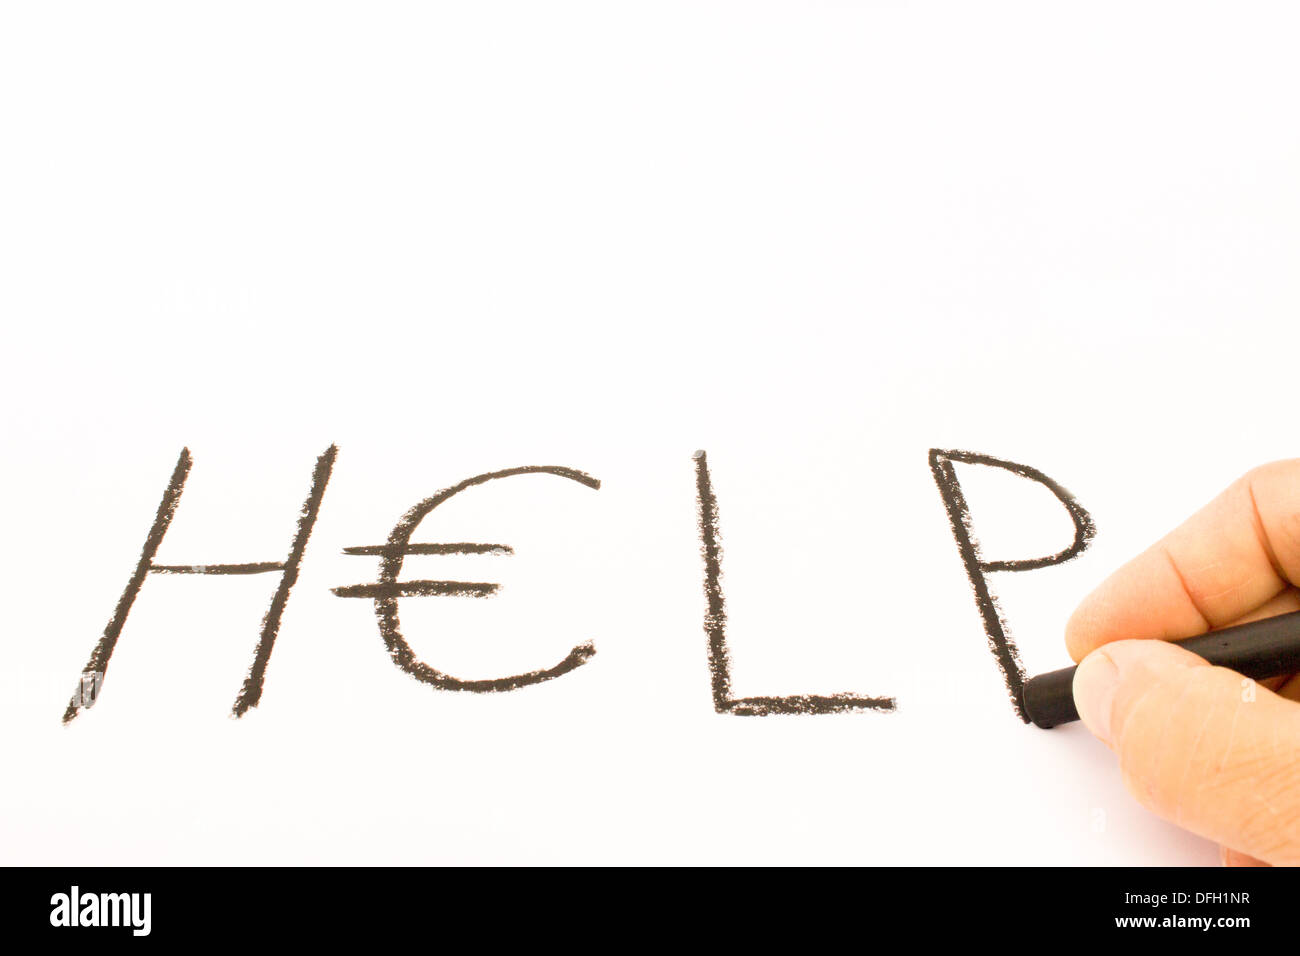 Hand writing the word HELP with crayon on white paper Stock Photo